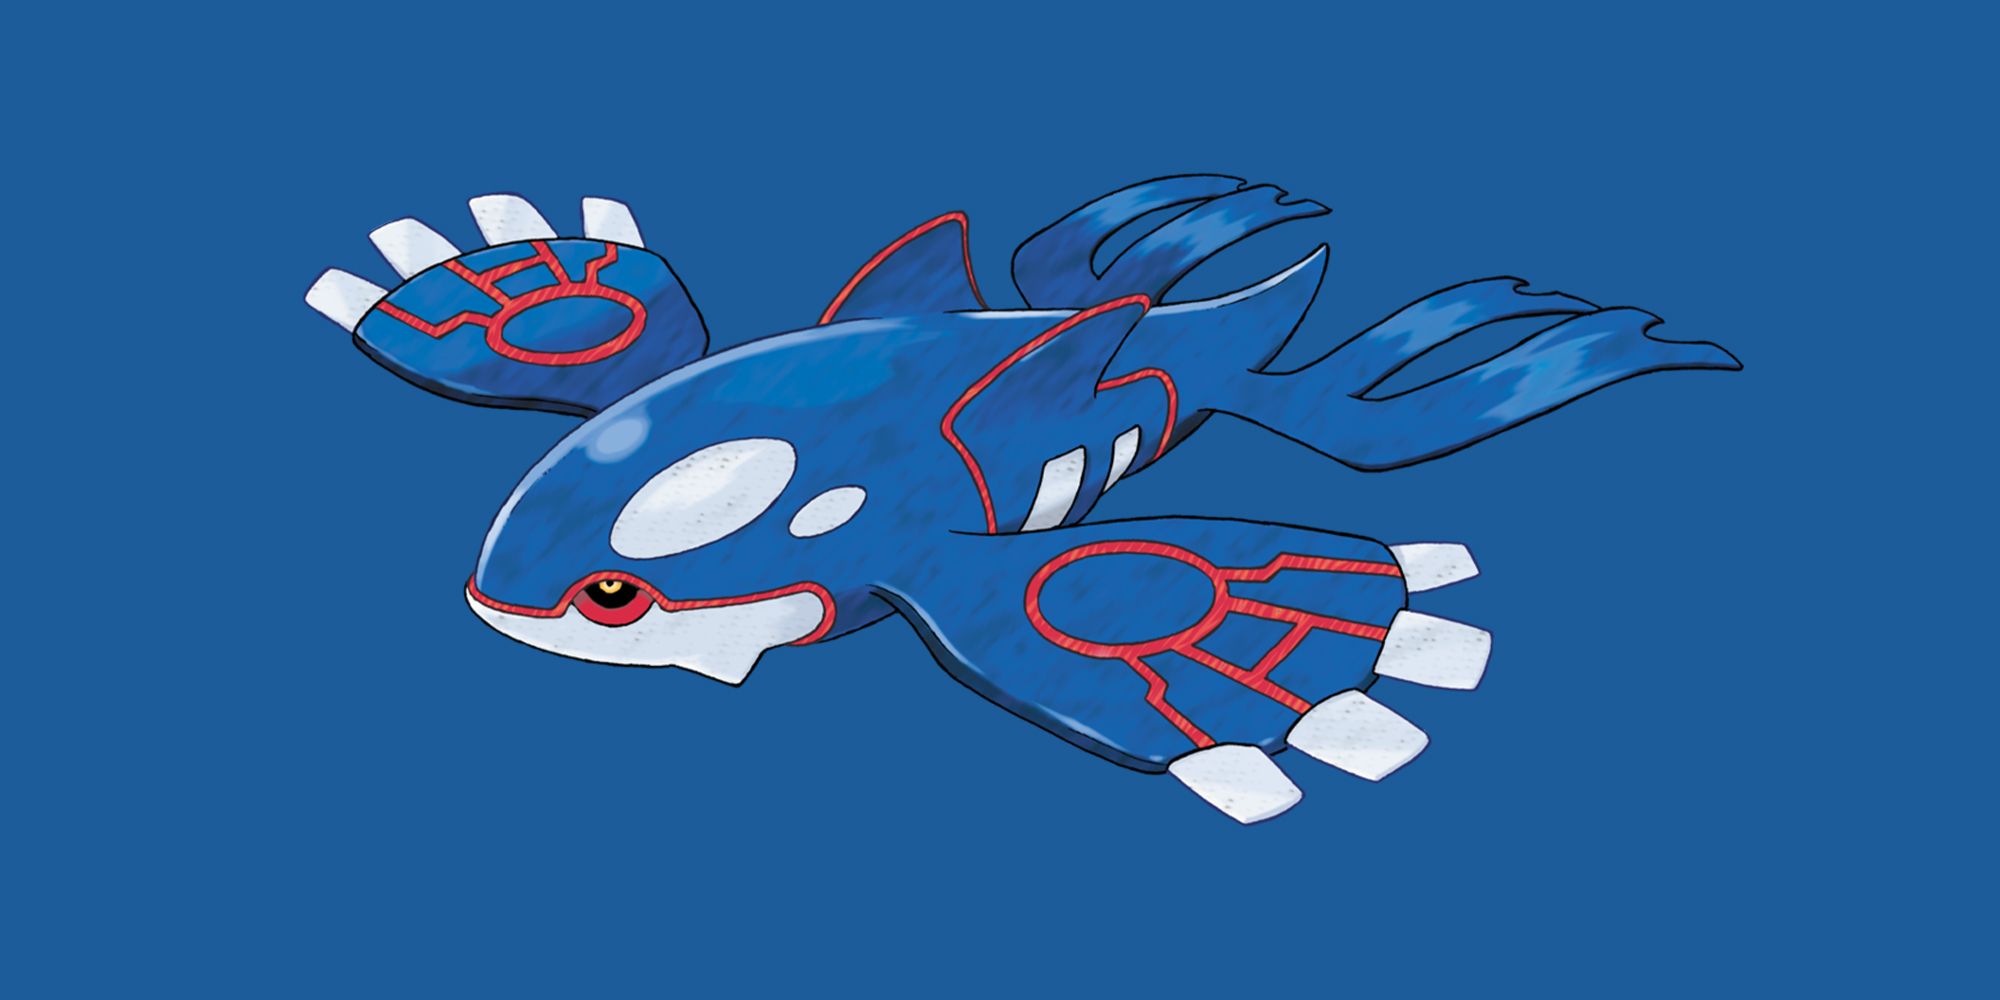 Kyogre from the Pokemon franchise on a blue background